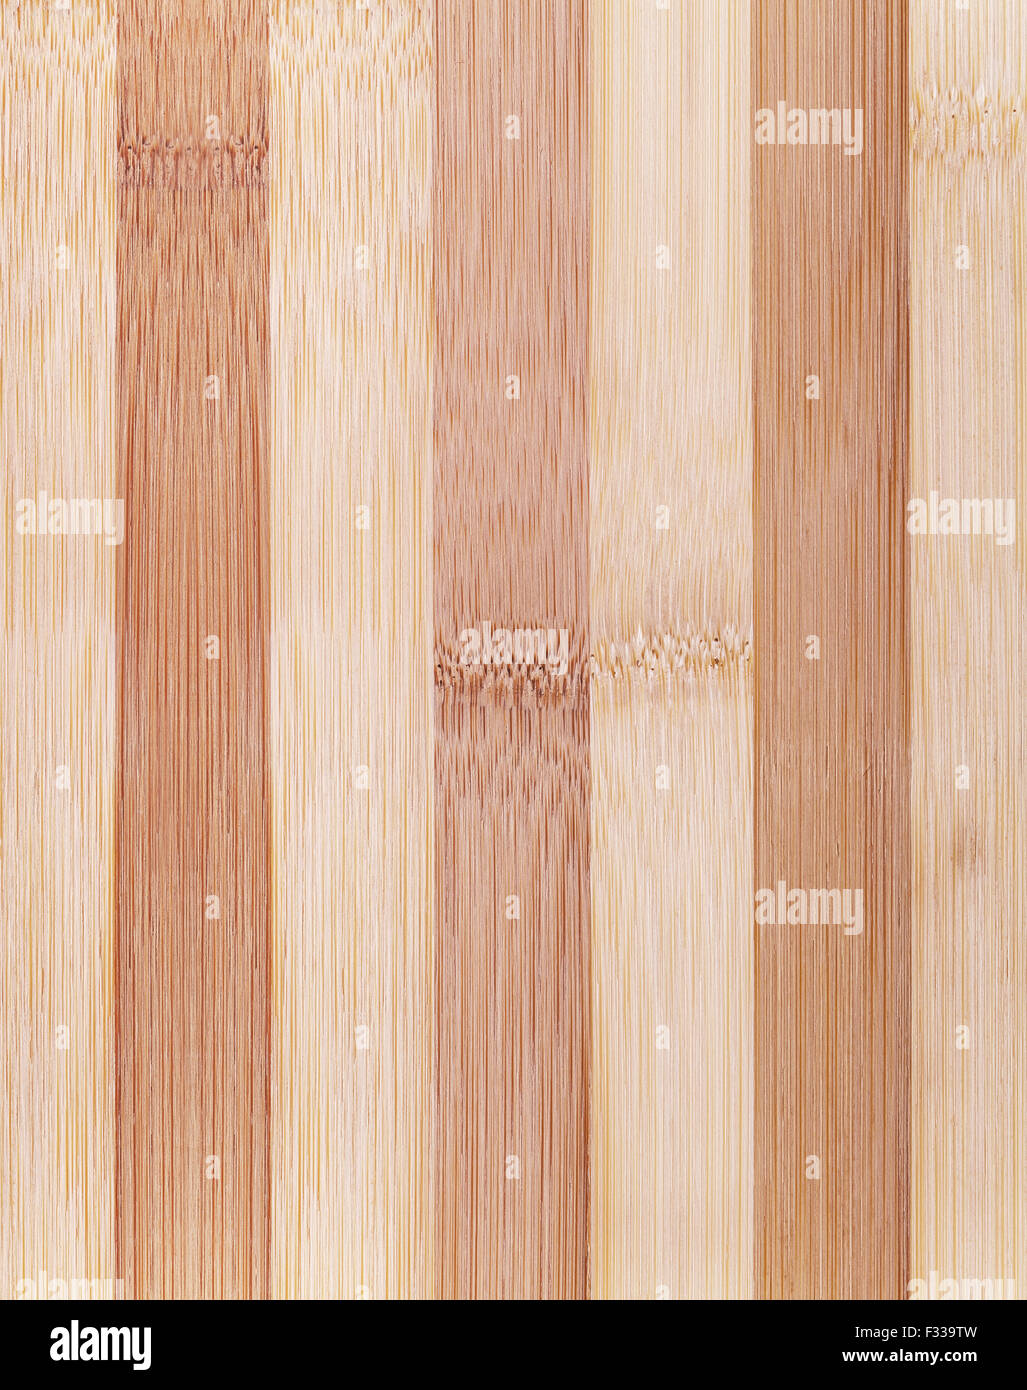 Vertical Background Texture Of New Clean Bamboo Board With Striped